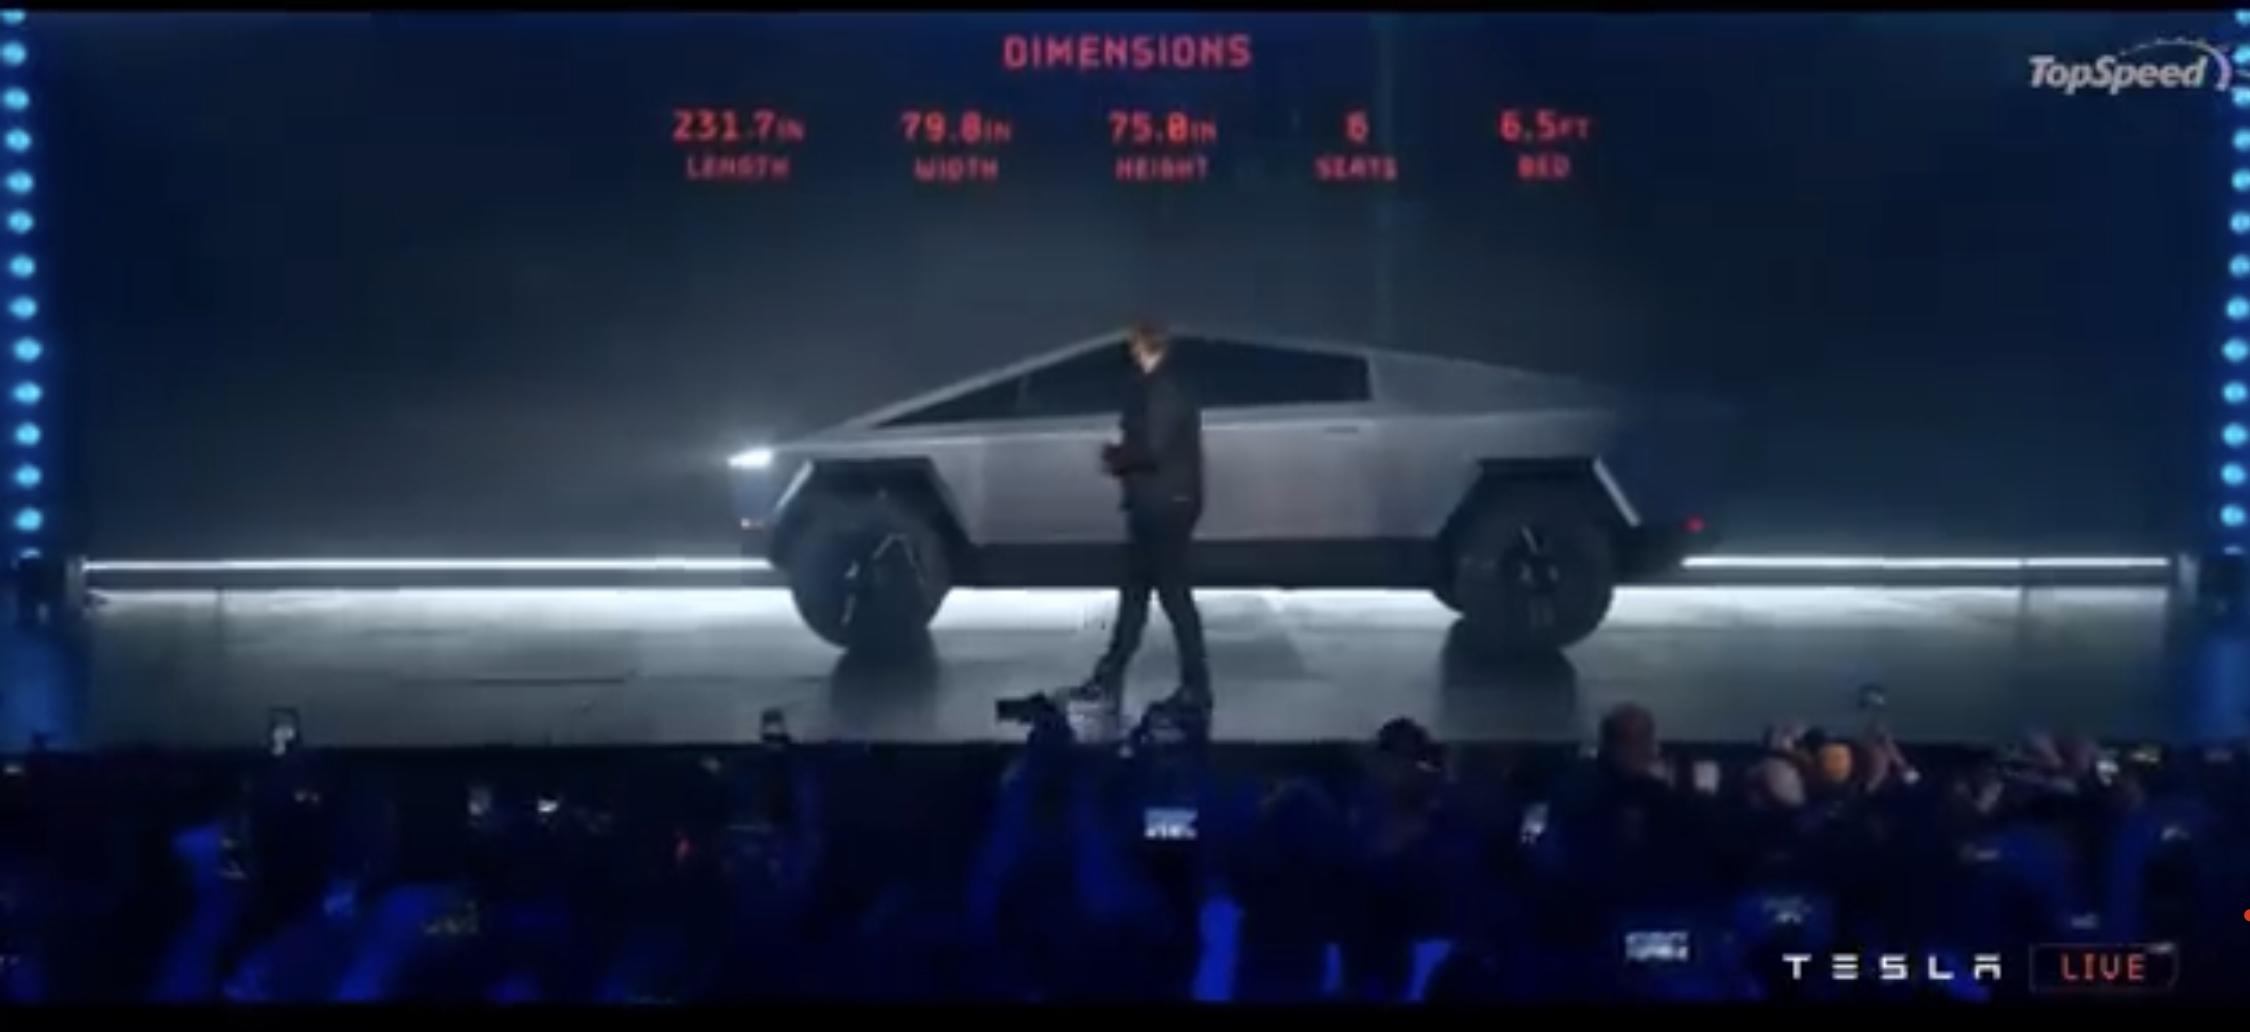 Tesla Cybertruck The Beta CT dimensions are now perfection 01312AAE-9B56-48D9-835F-60F7688164D1